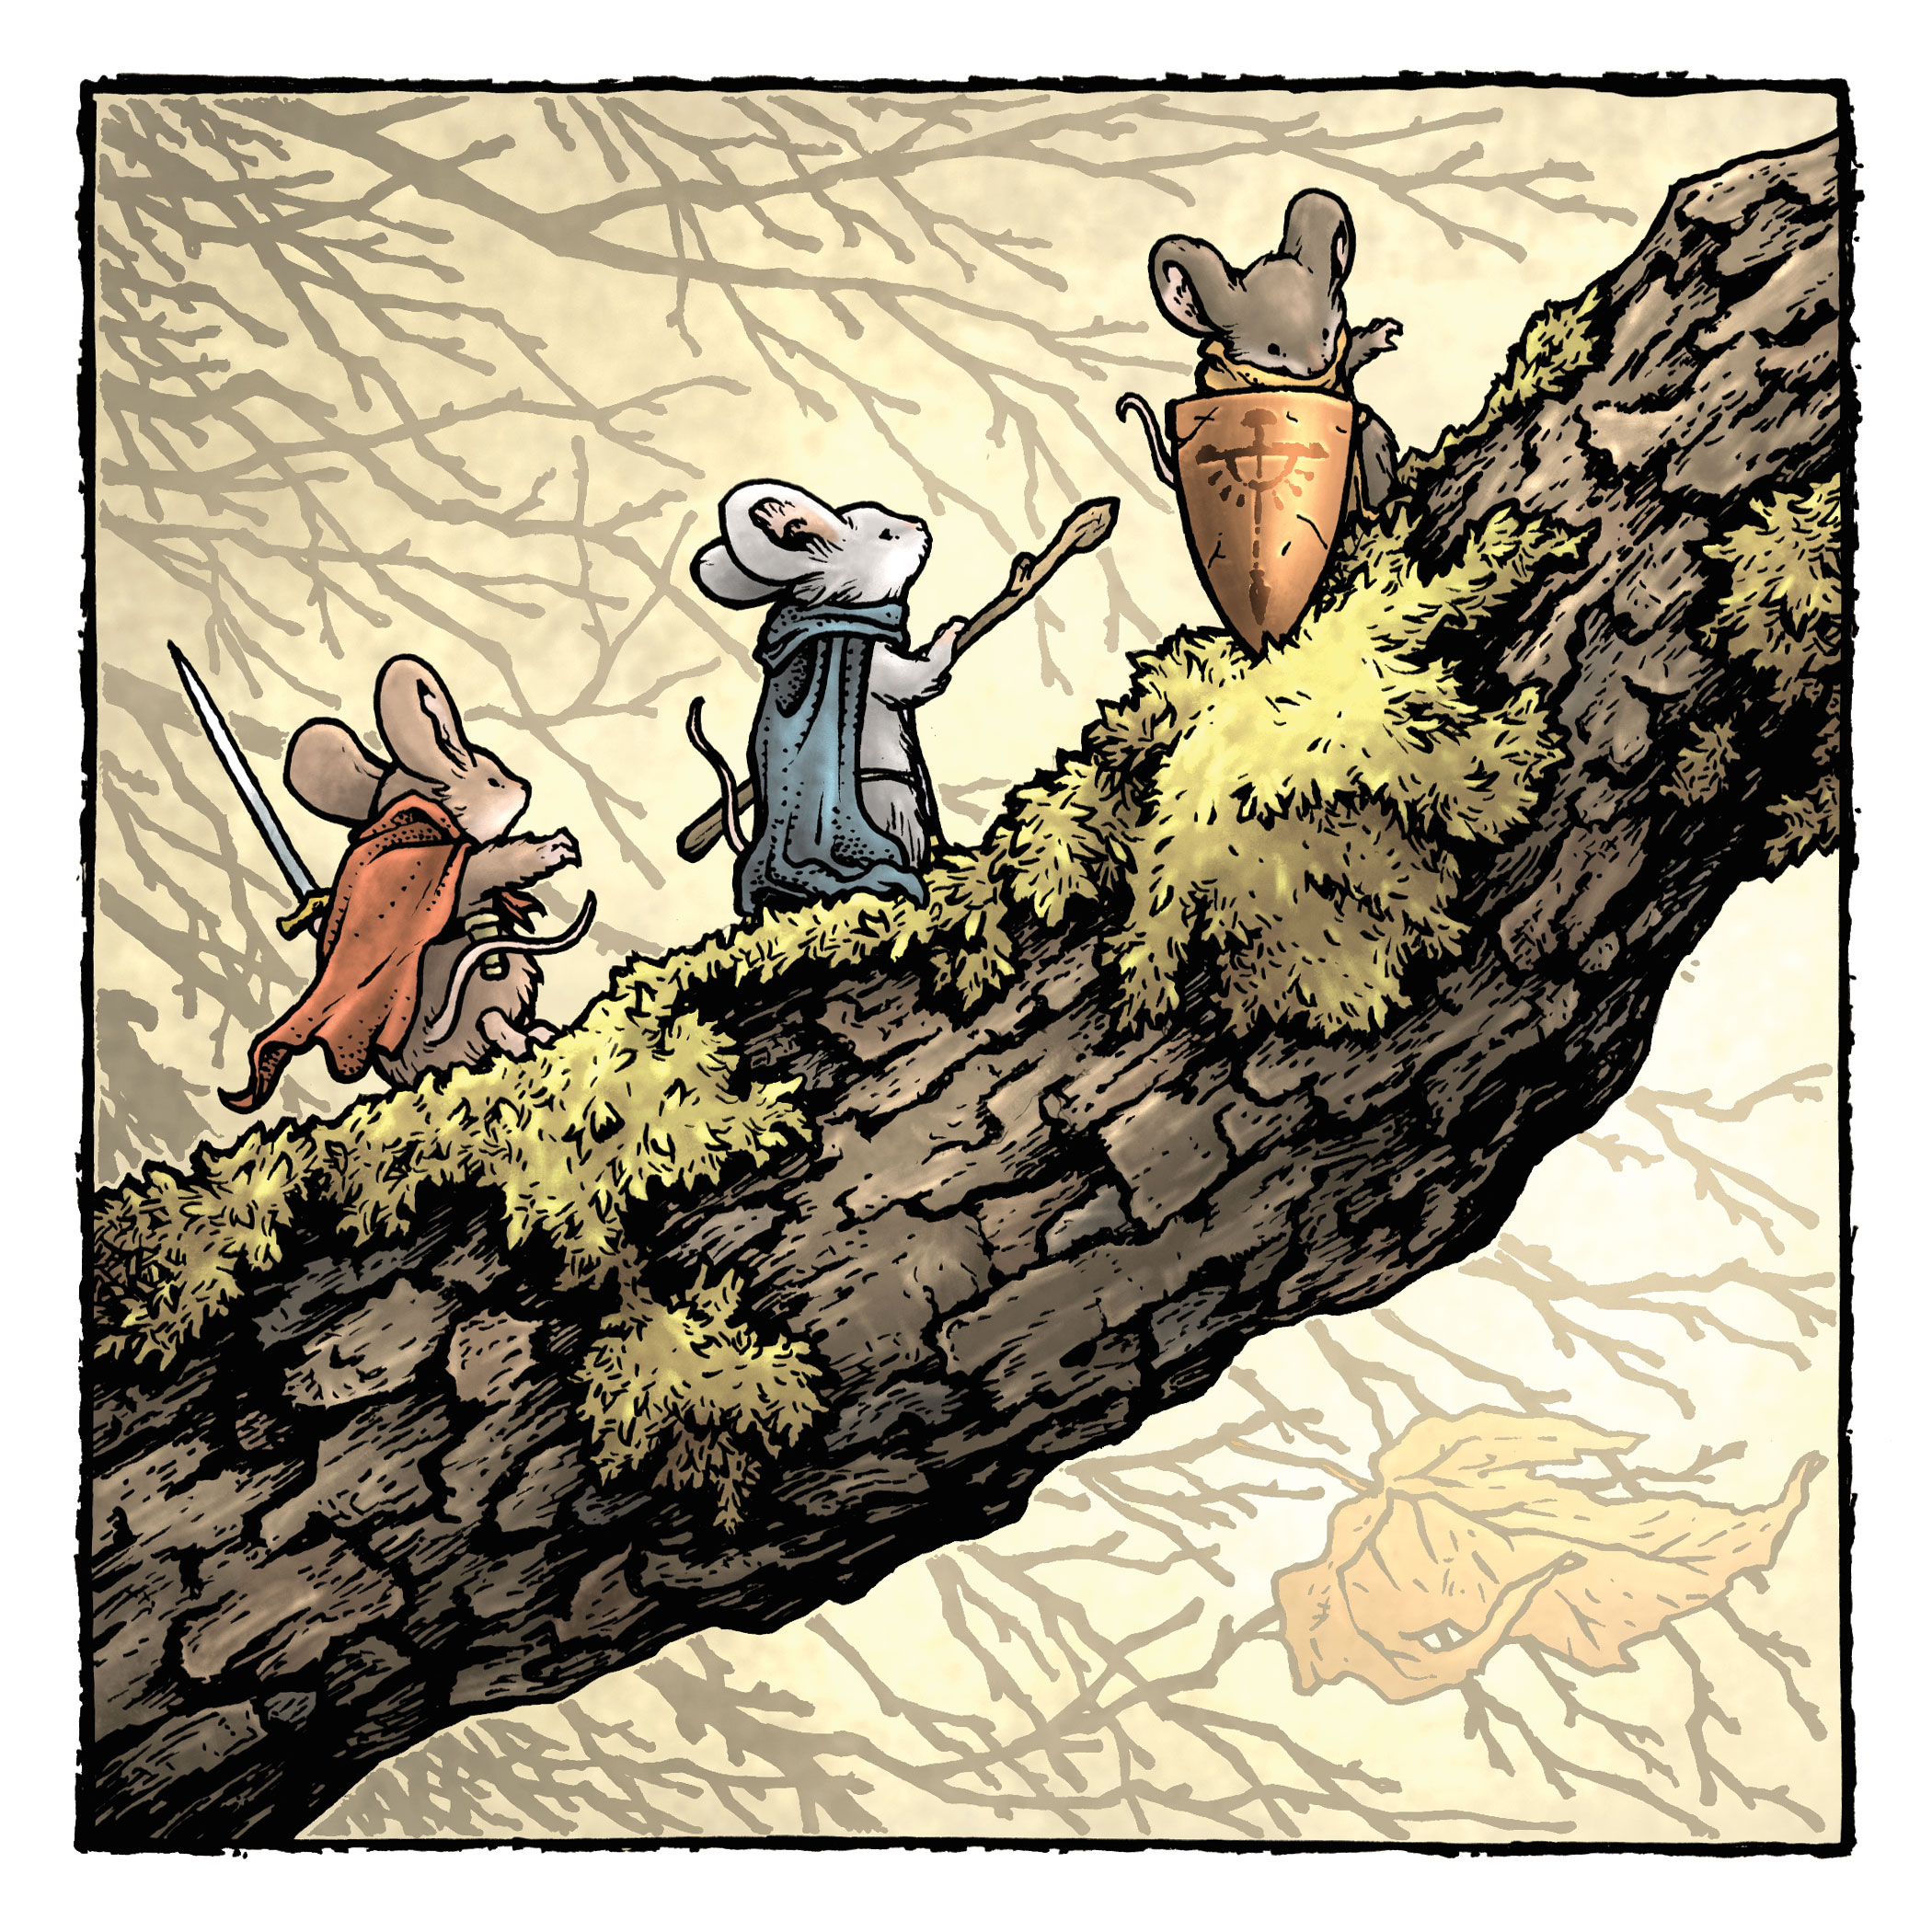 Mouse Guard - adventures focused mainly on the wilderness between mouse settlements and nature as a potential source of threat.